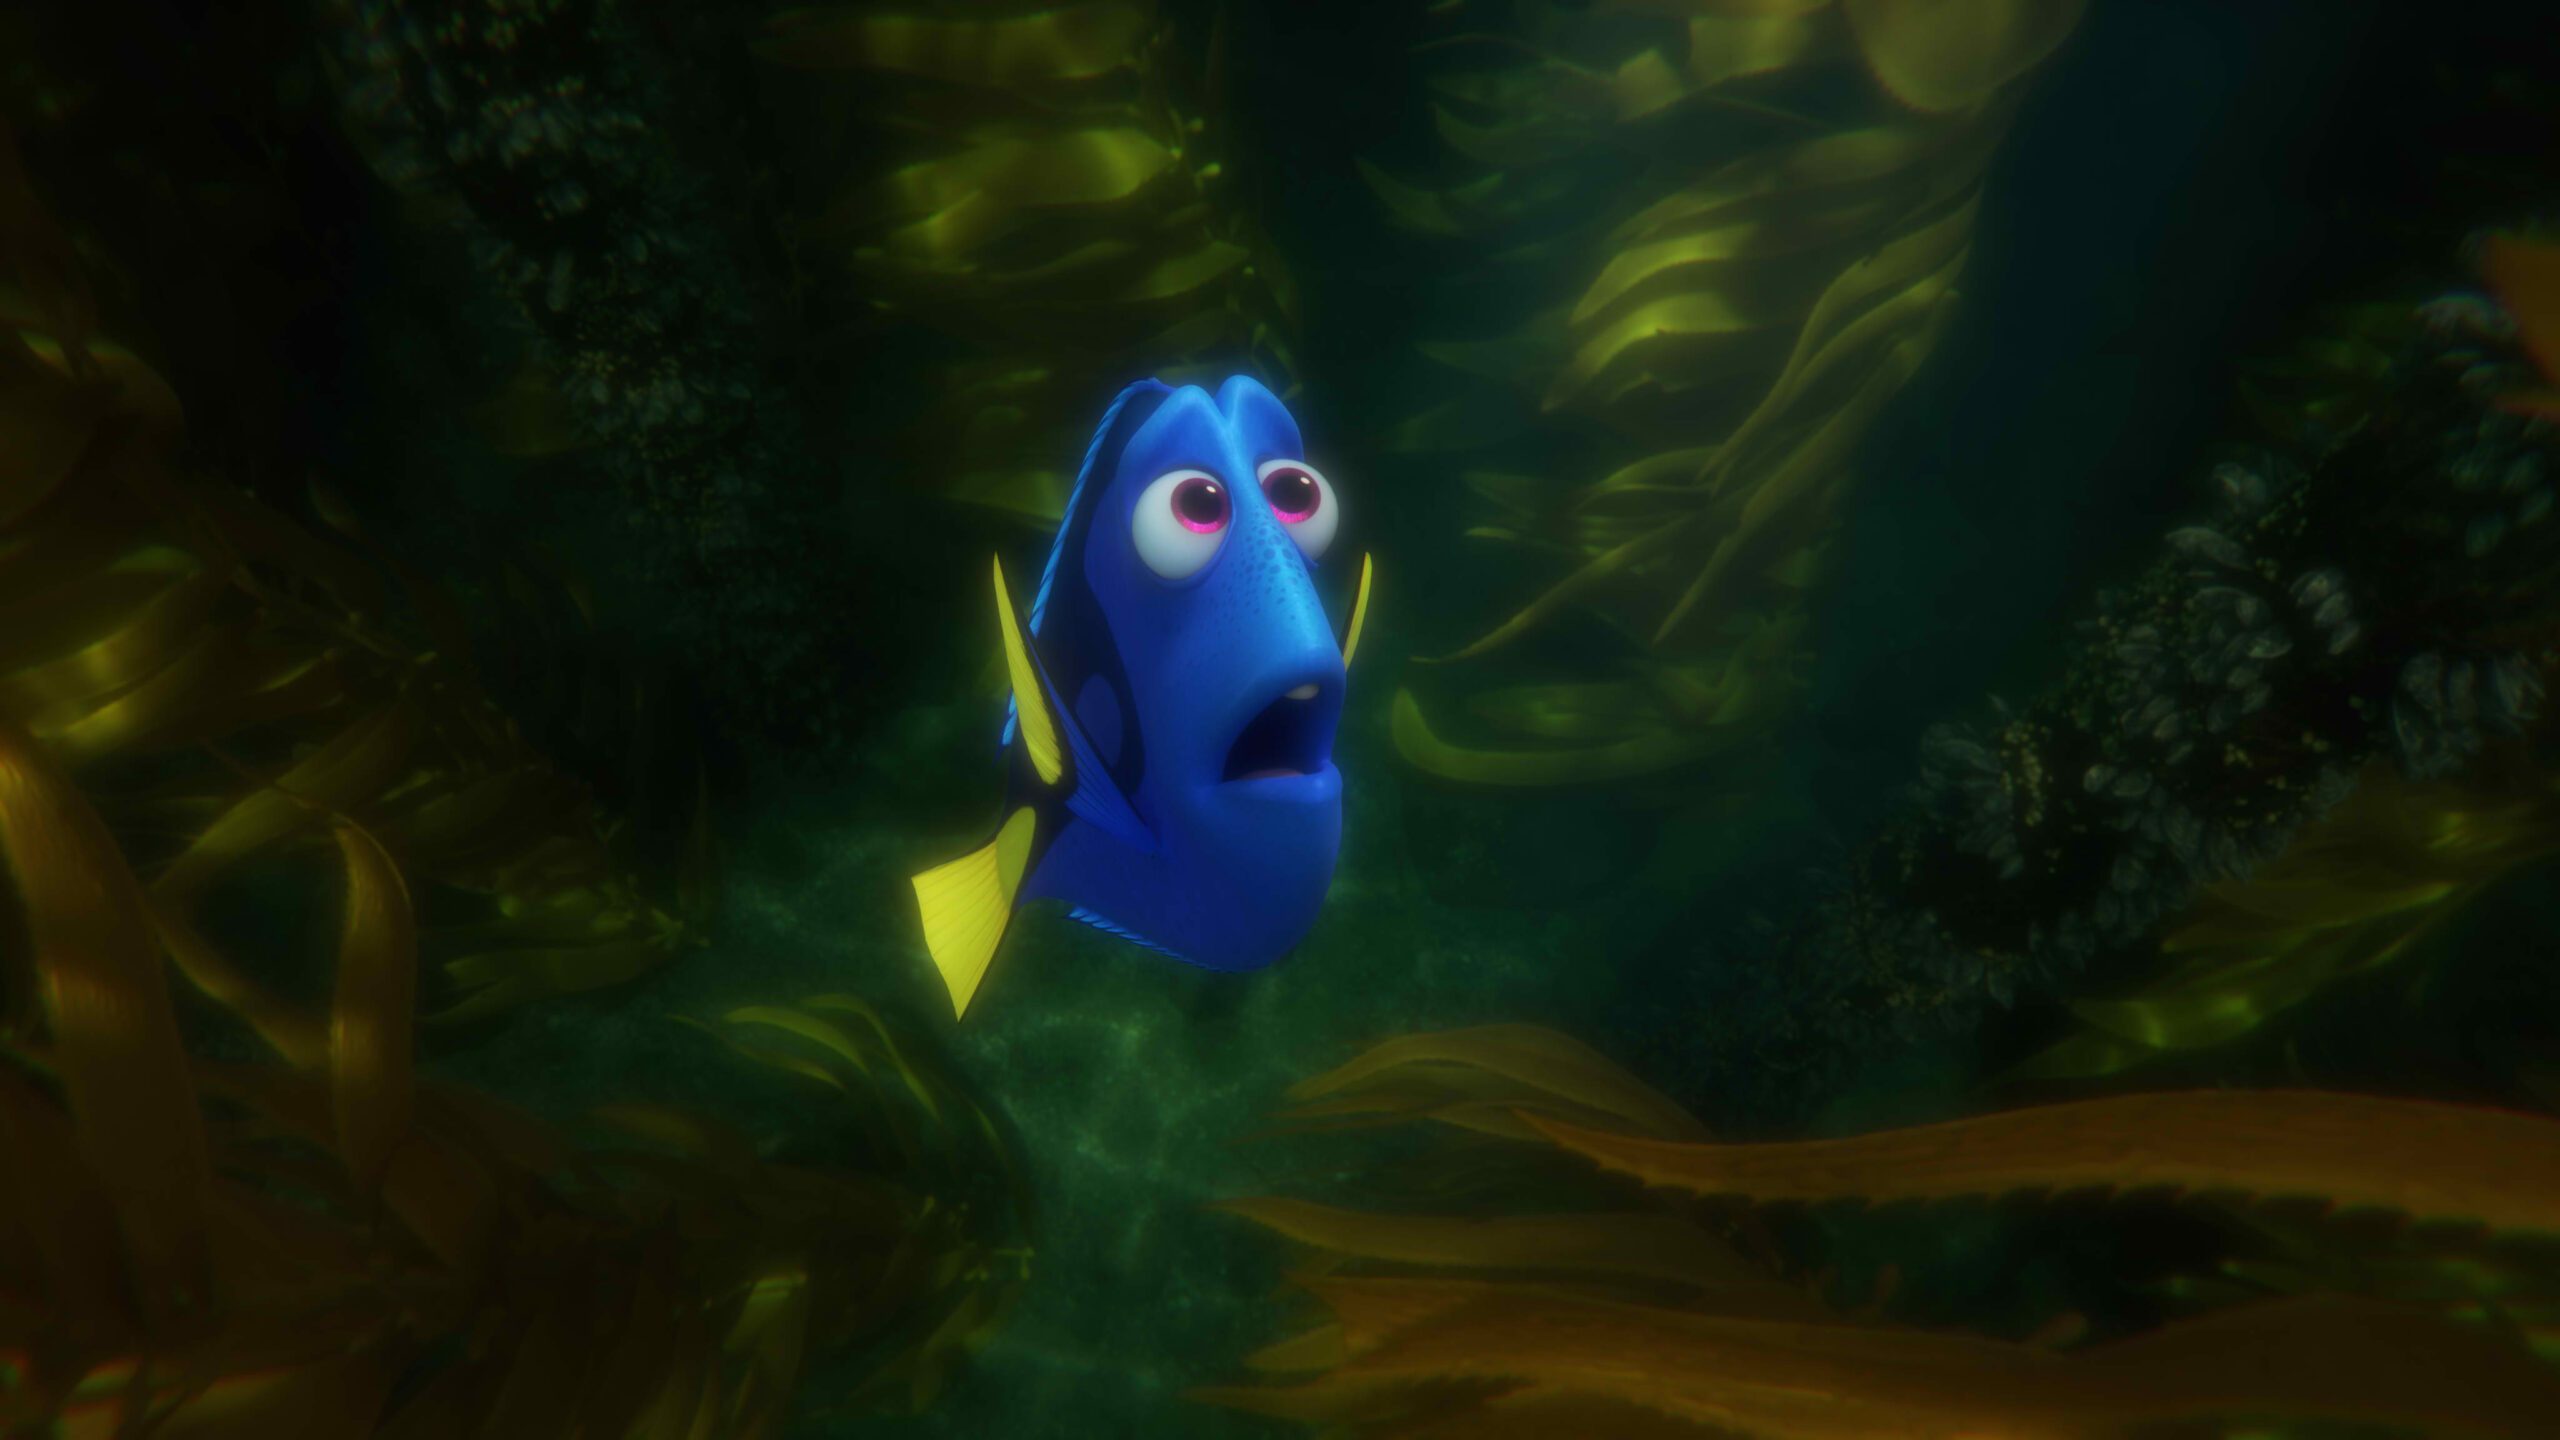 WATCH: Justin Bieber’s ‘Sorry’ gets ‘Finding Dory’ treatment